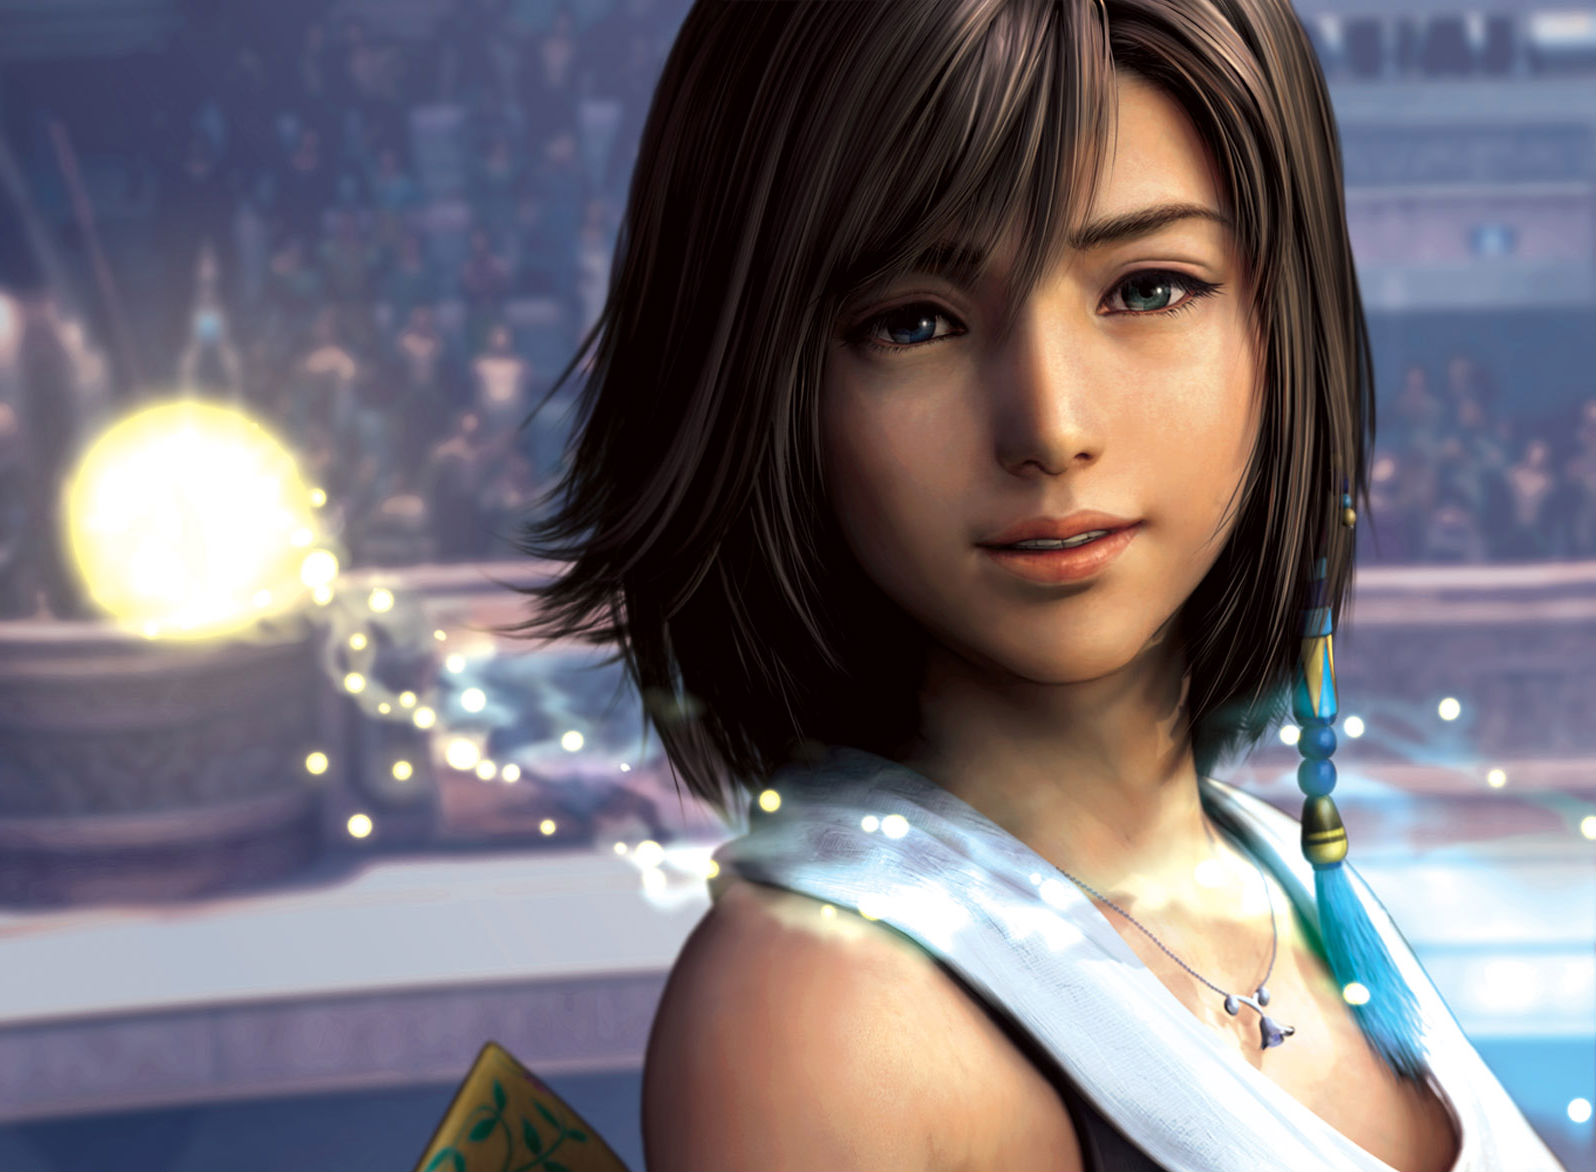 30+ Final Fantasy X HD Wallpapers and Backgrounds